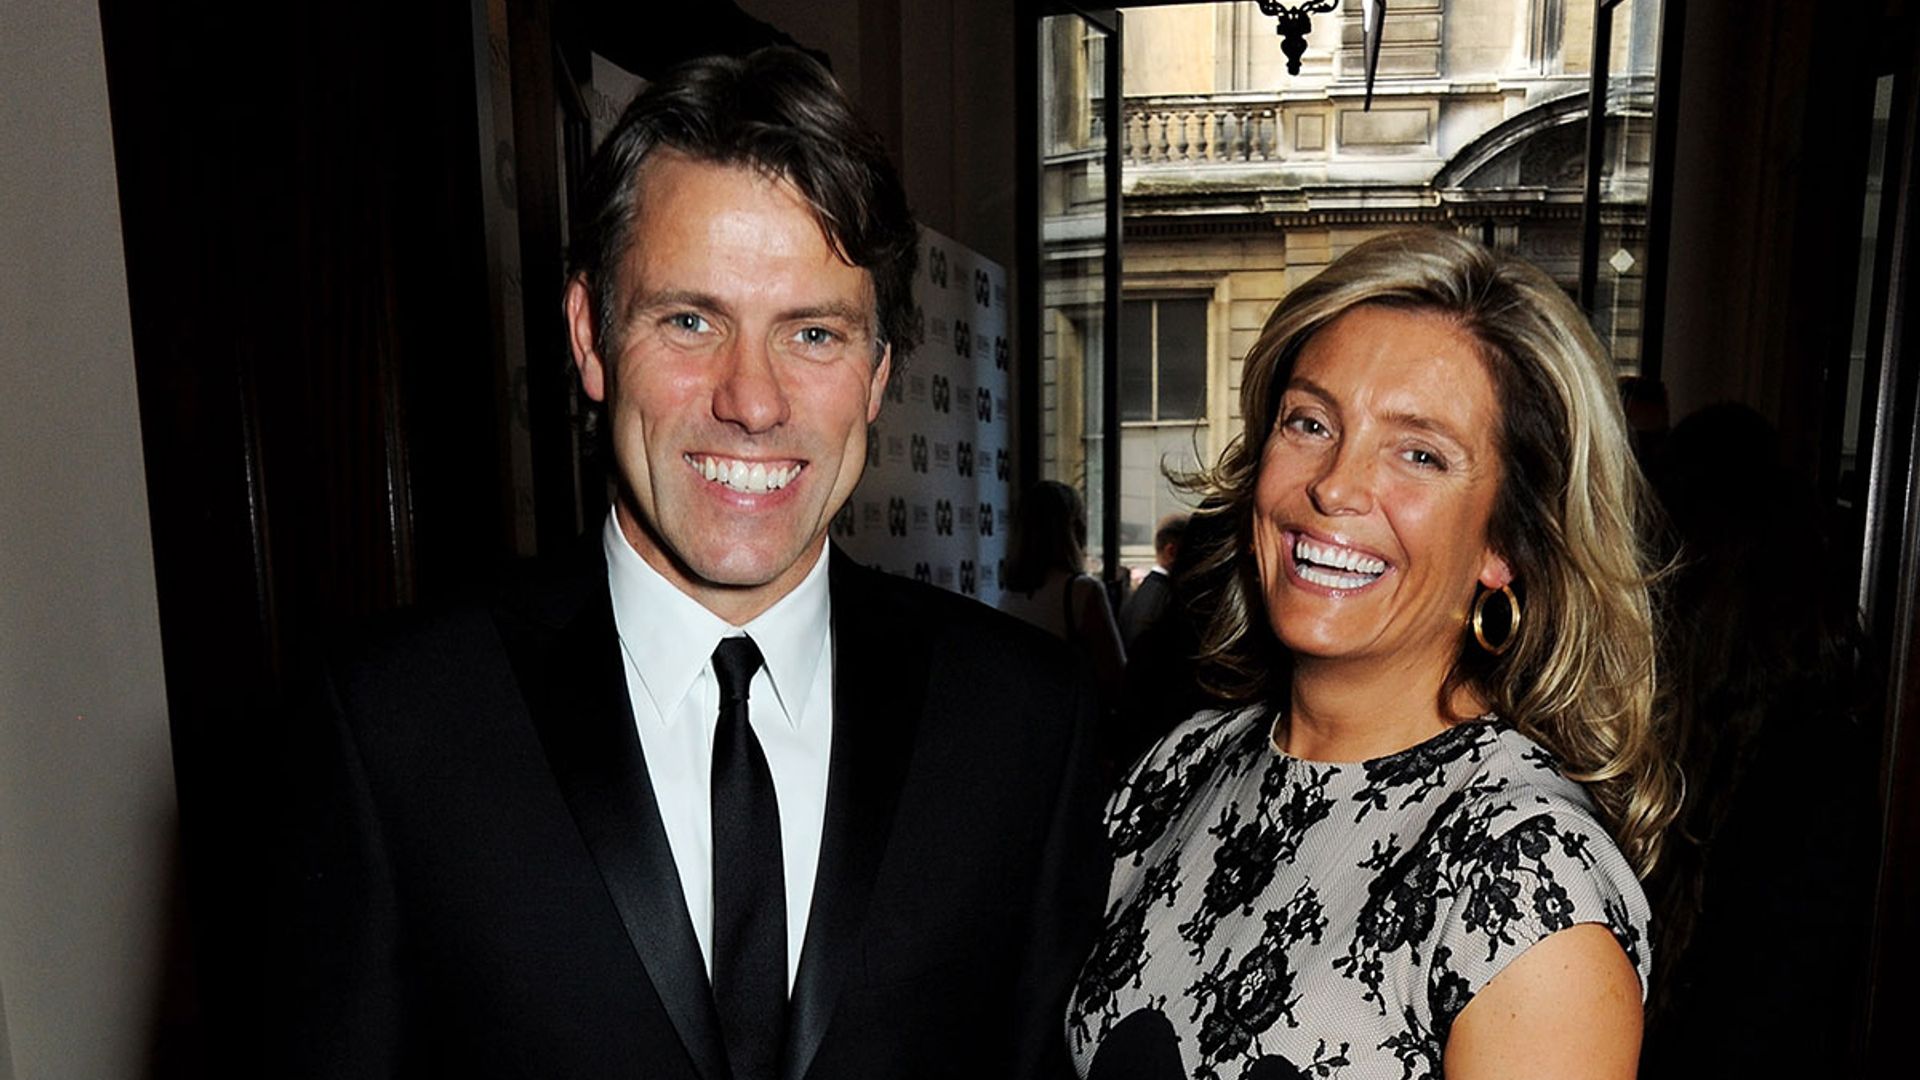 The John Bishop Show: Who is the comedian married to?